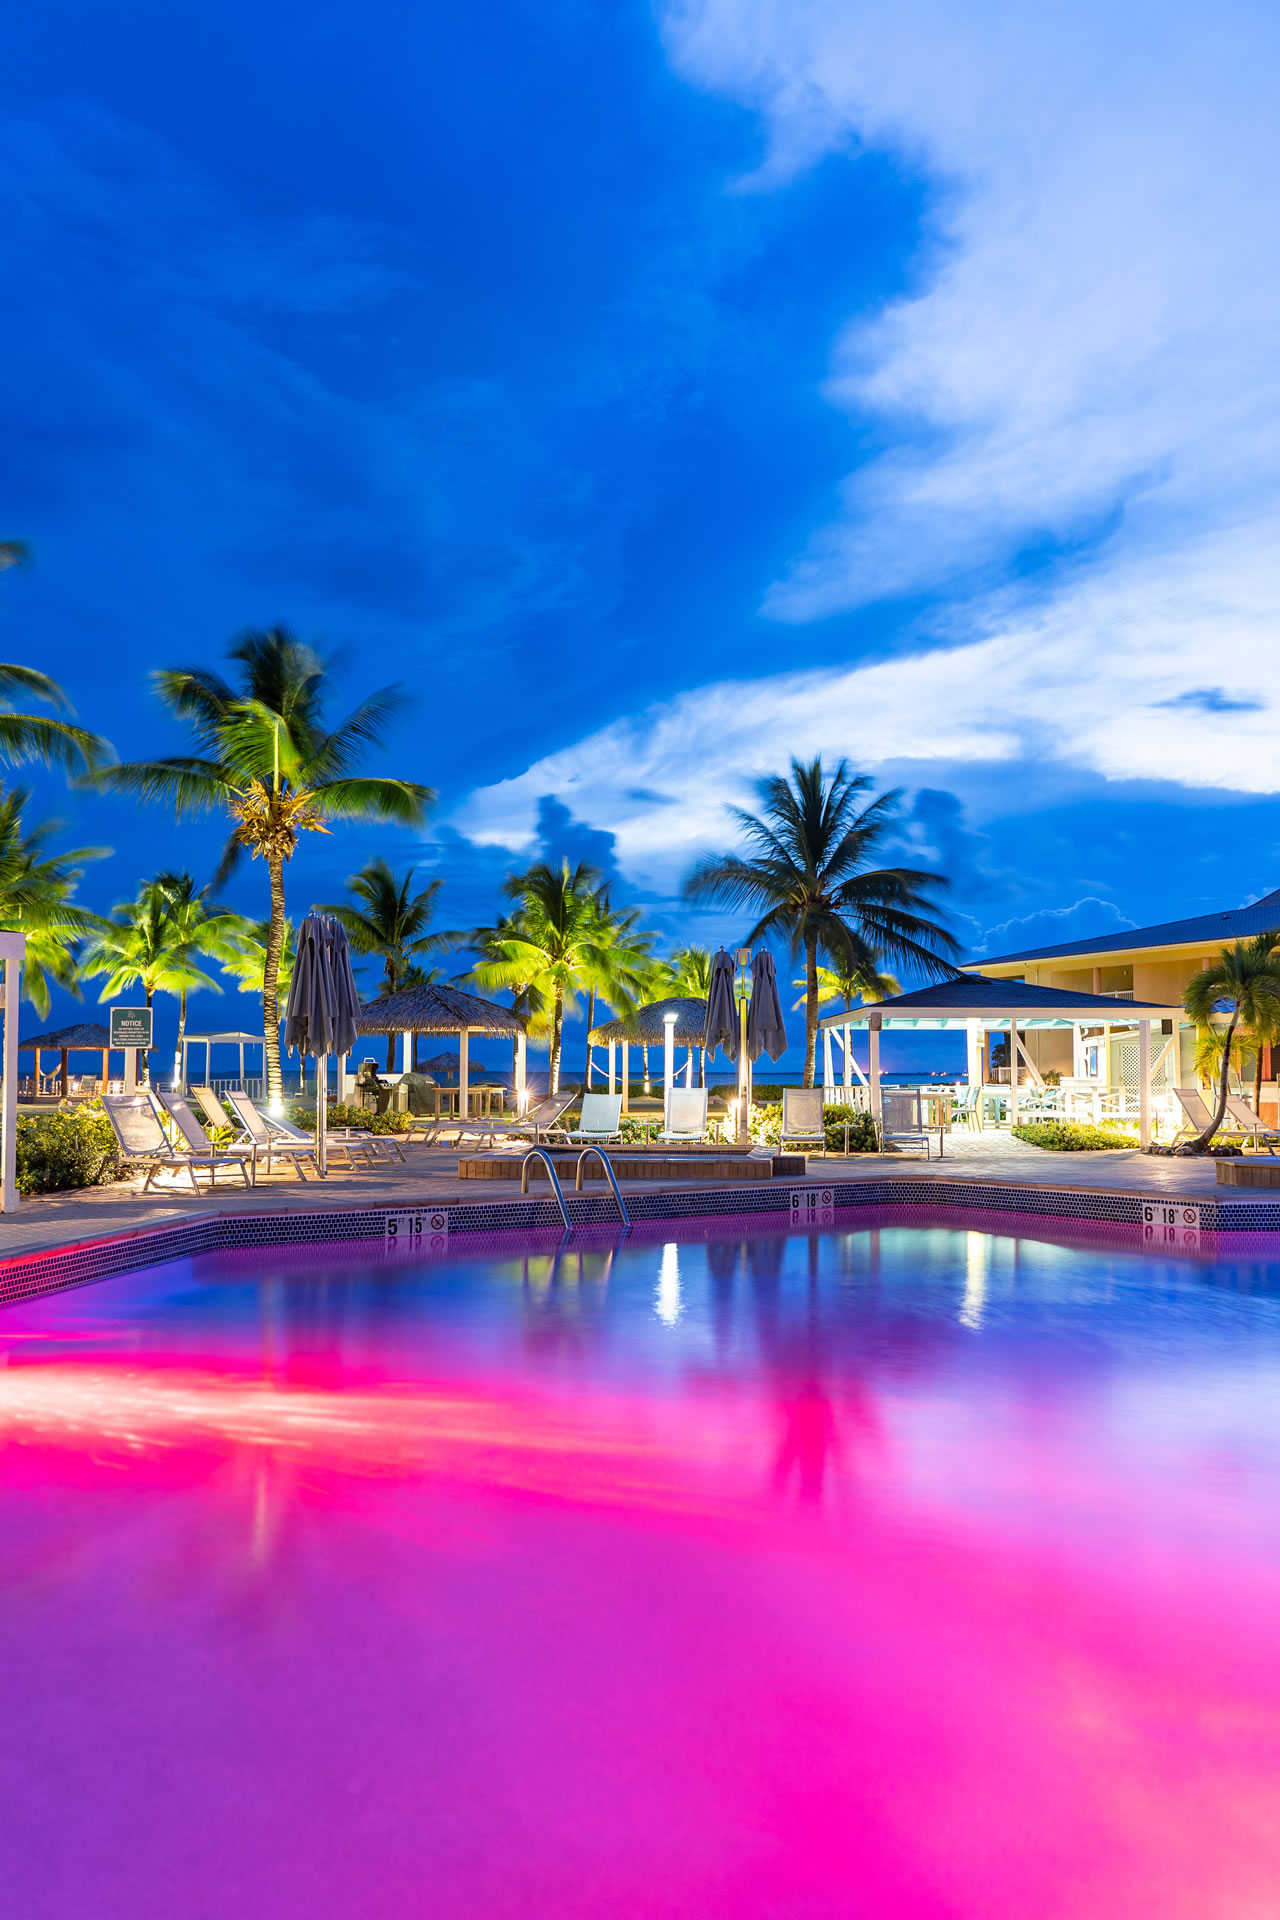 The pool of the Grand Caymanian resort at dusk.